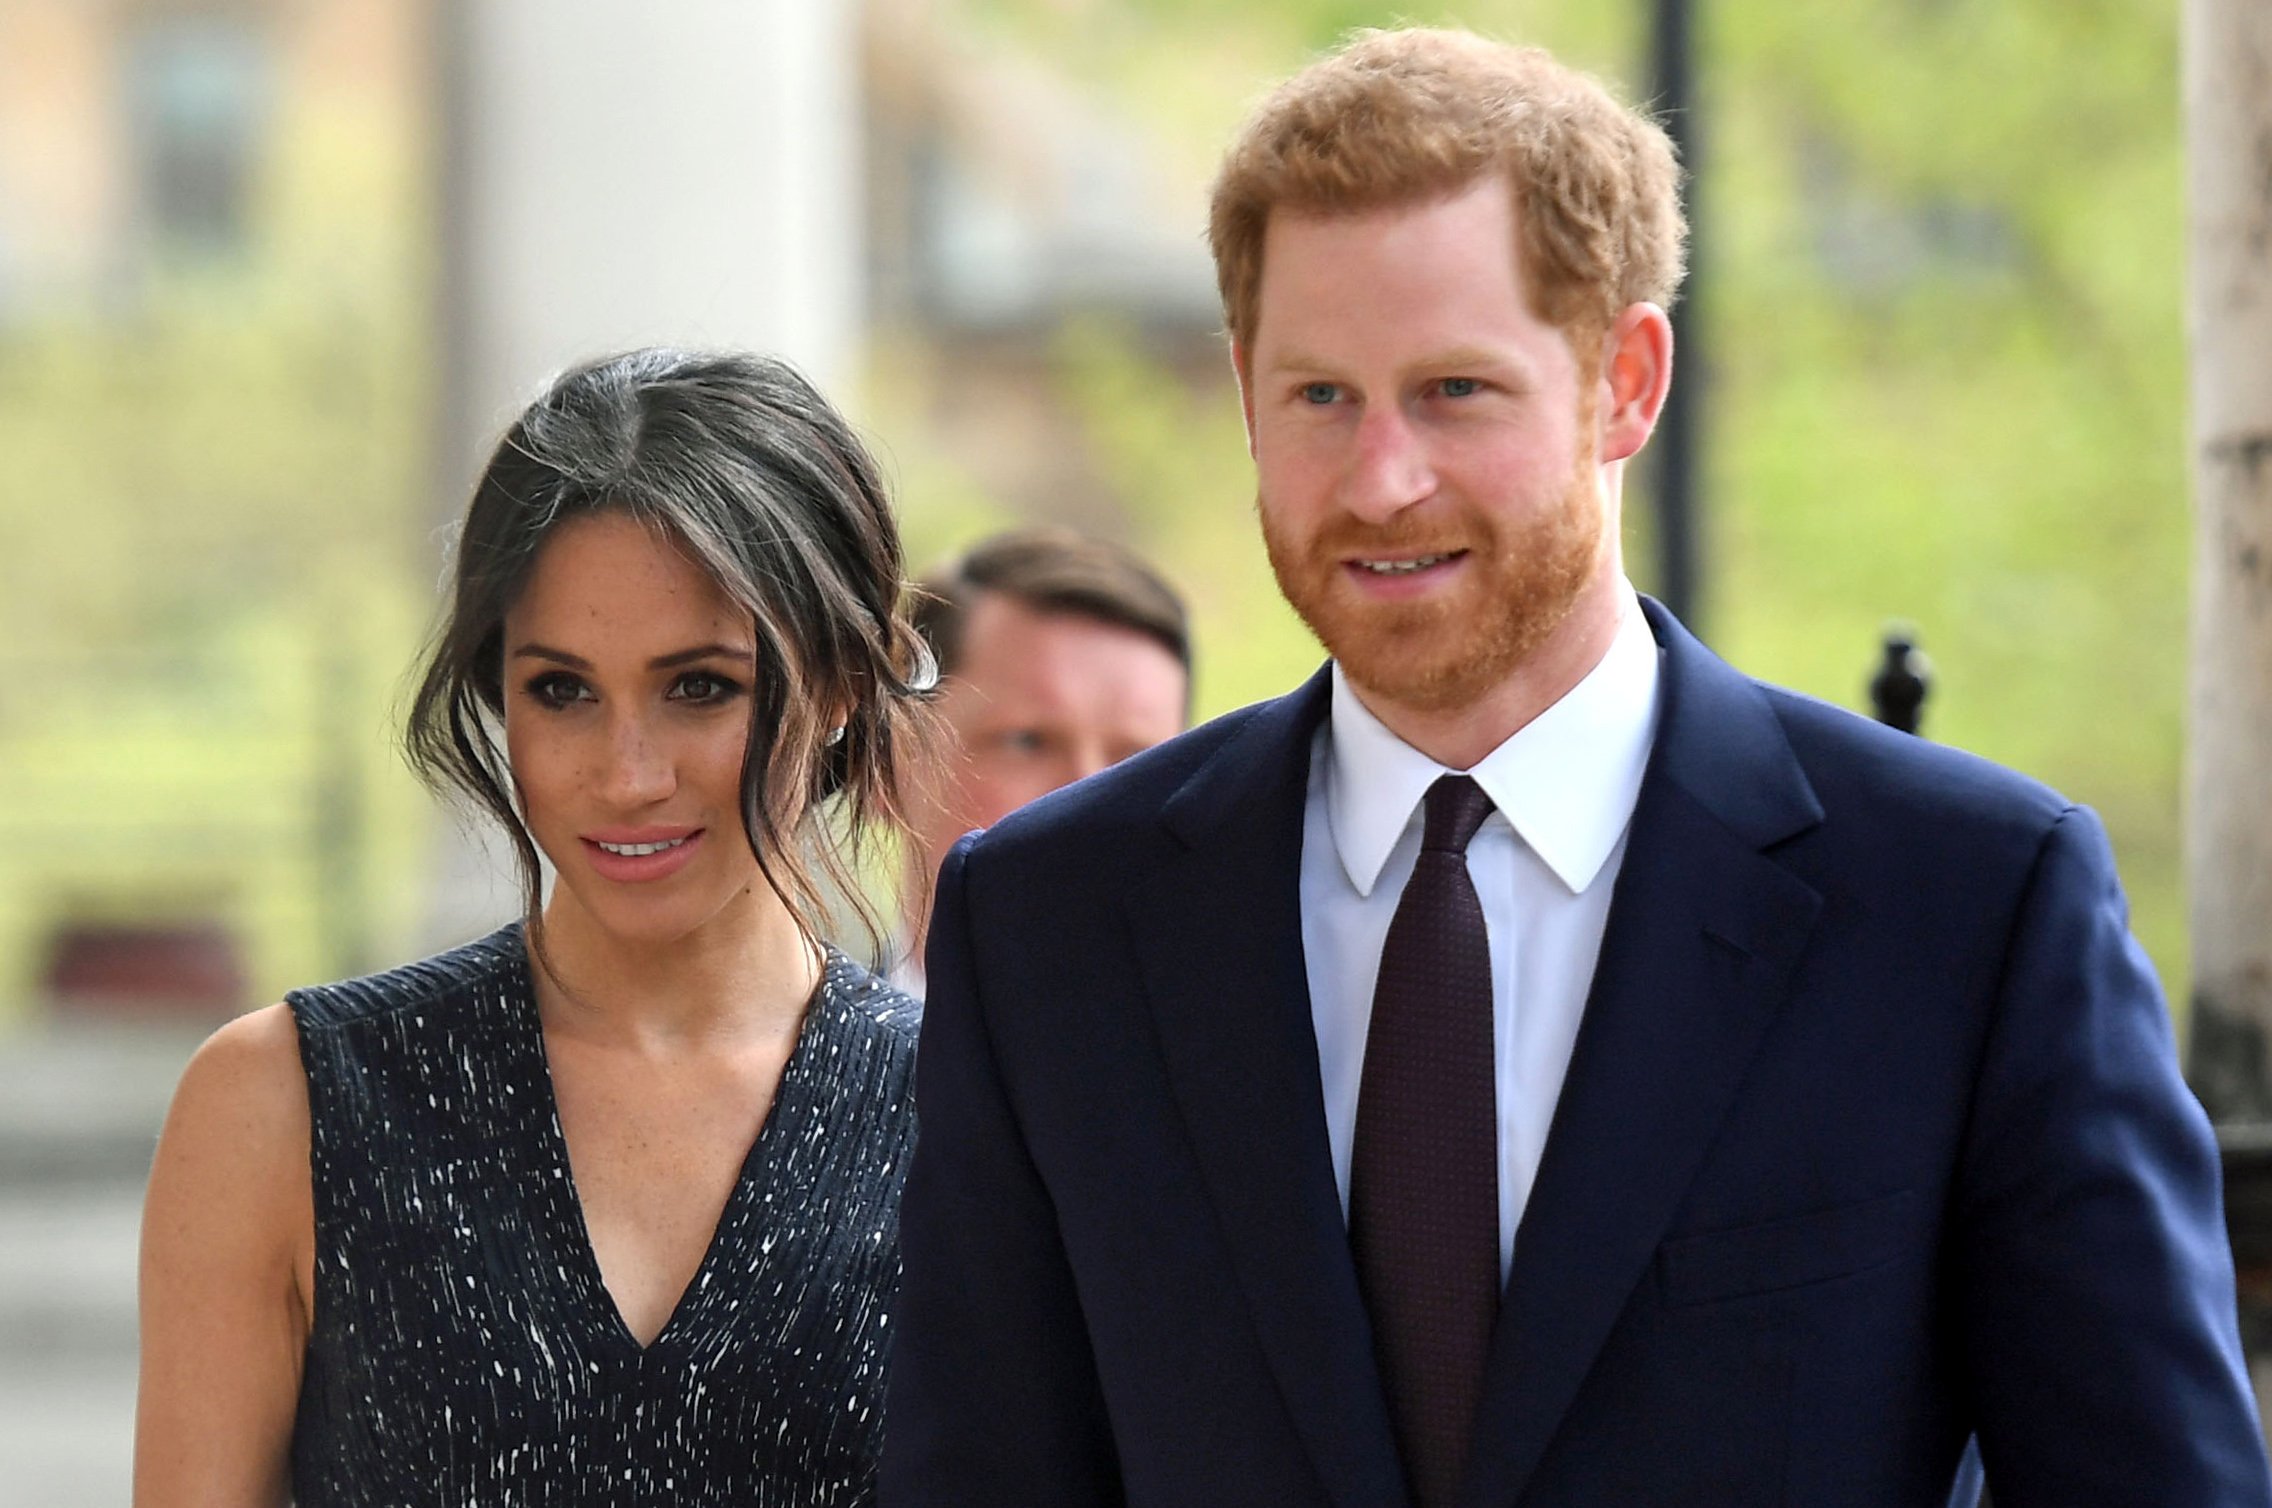 Meghan Markle and Prince Harry walk together during an event.